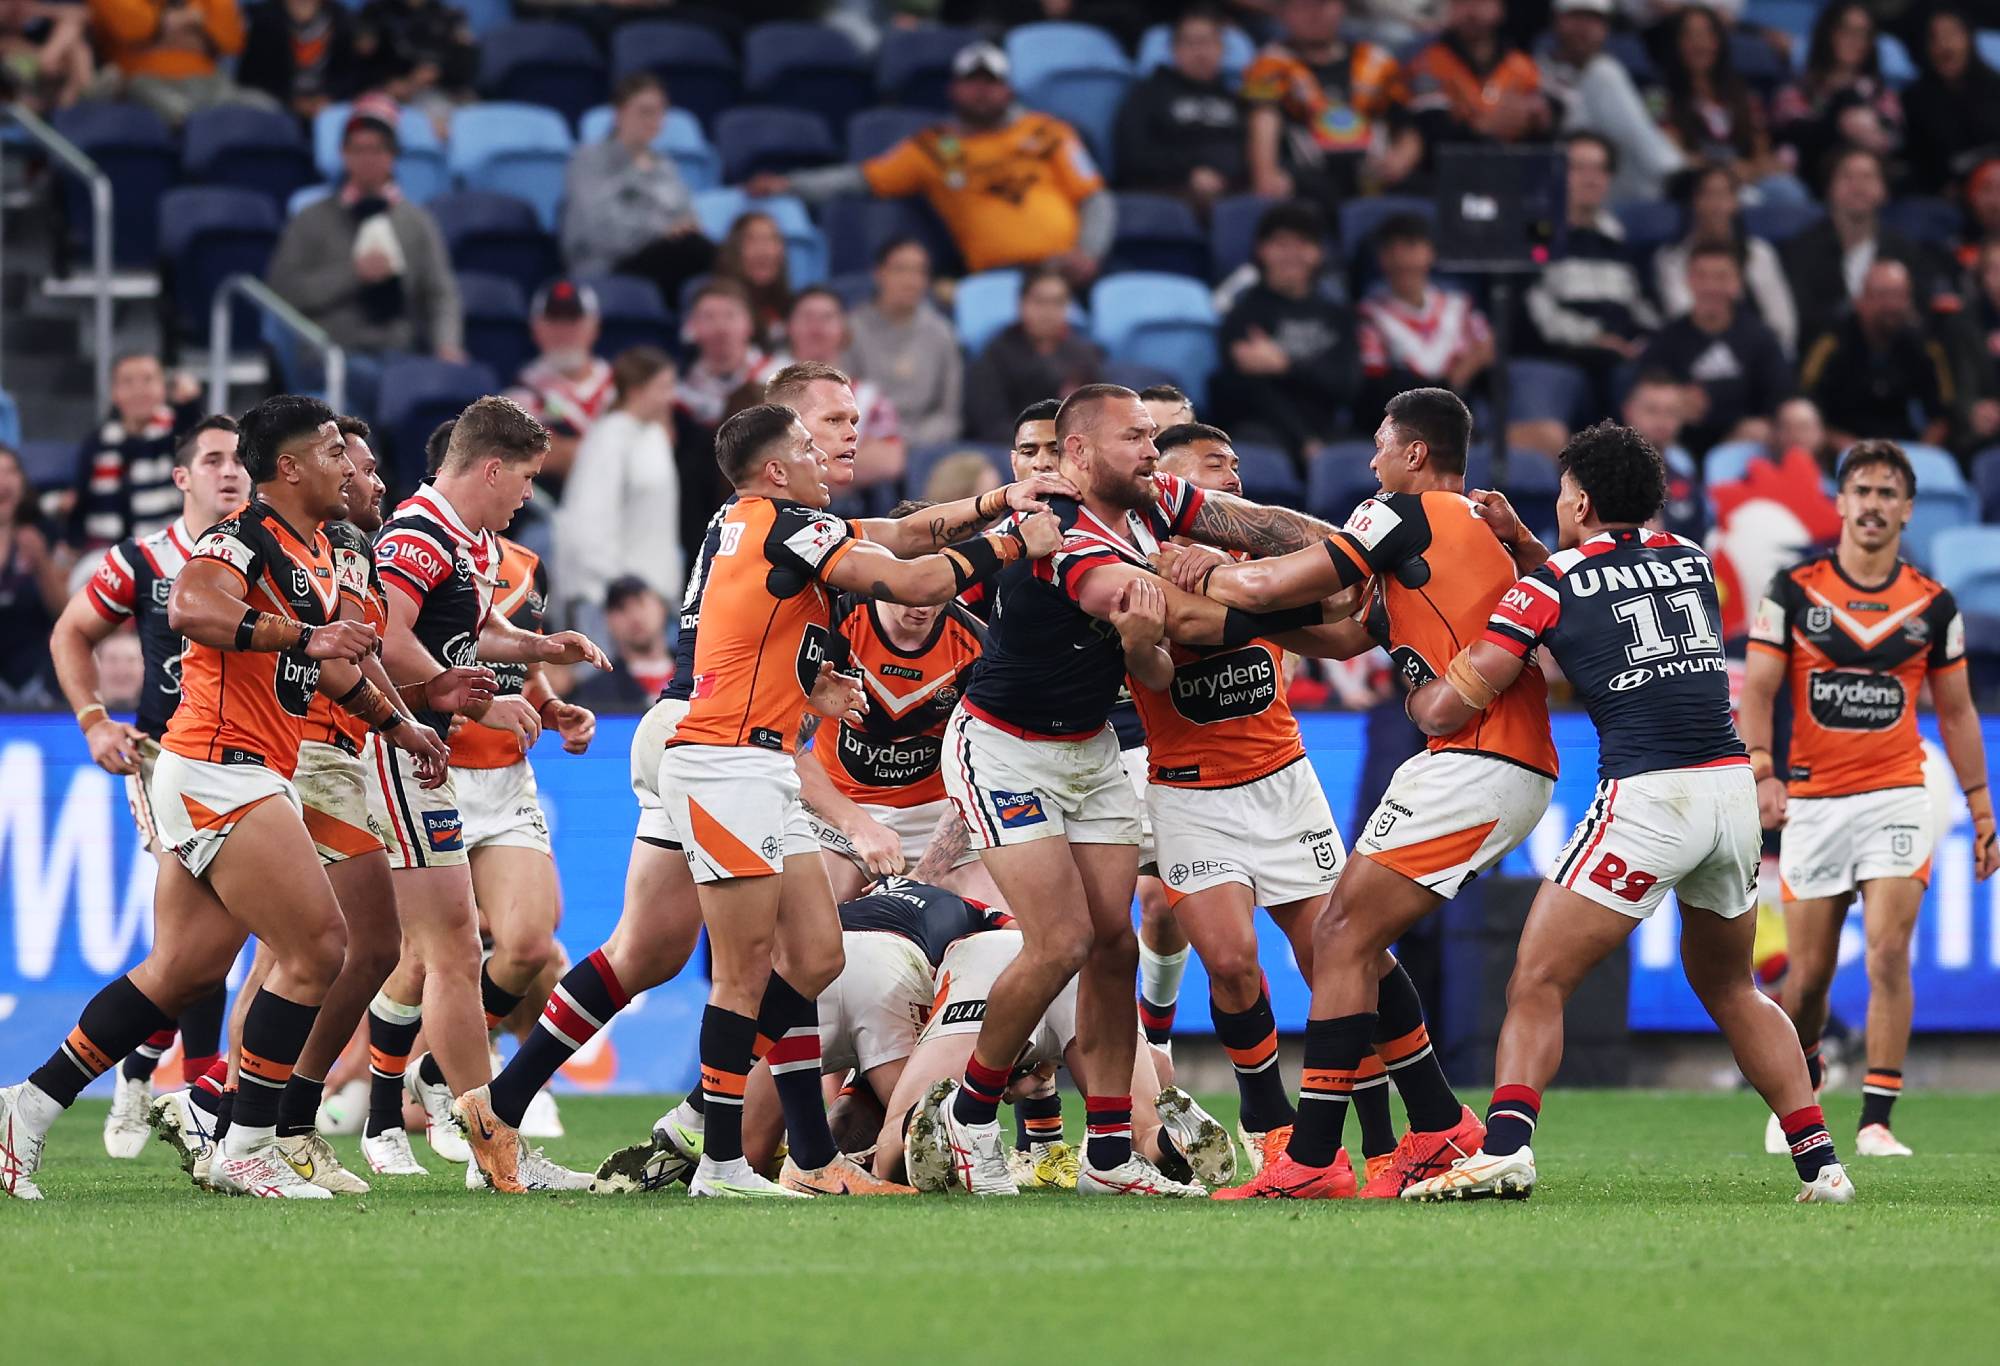 SYDNEY, AUSTRALIA - AUGUST 26: Jared Waerea-Hargreaves of the Roosters scuffles with Tigers players during the round 26 NRL match between Sydney Roosters and Wests Tigers at Allianz Stadium on August 26, 2023 in Sydney, Australia. (Photo by Matt King/Getty Images)